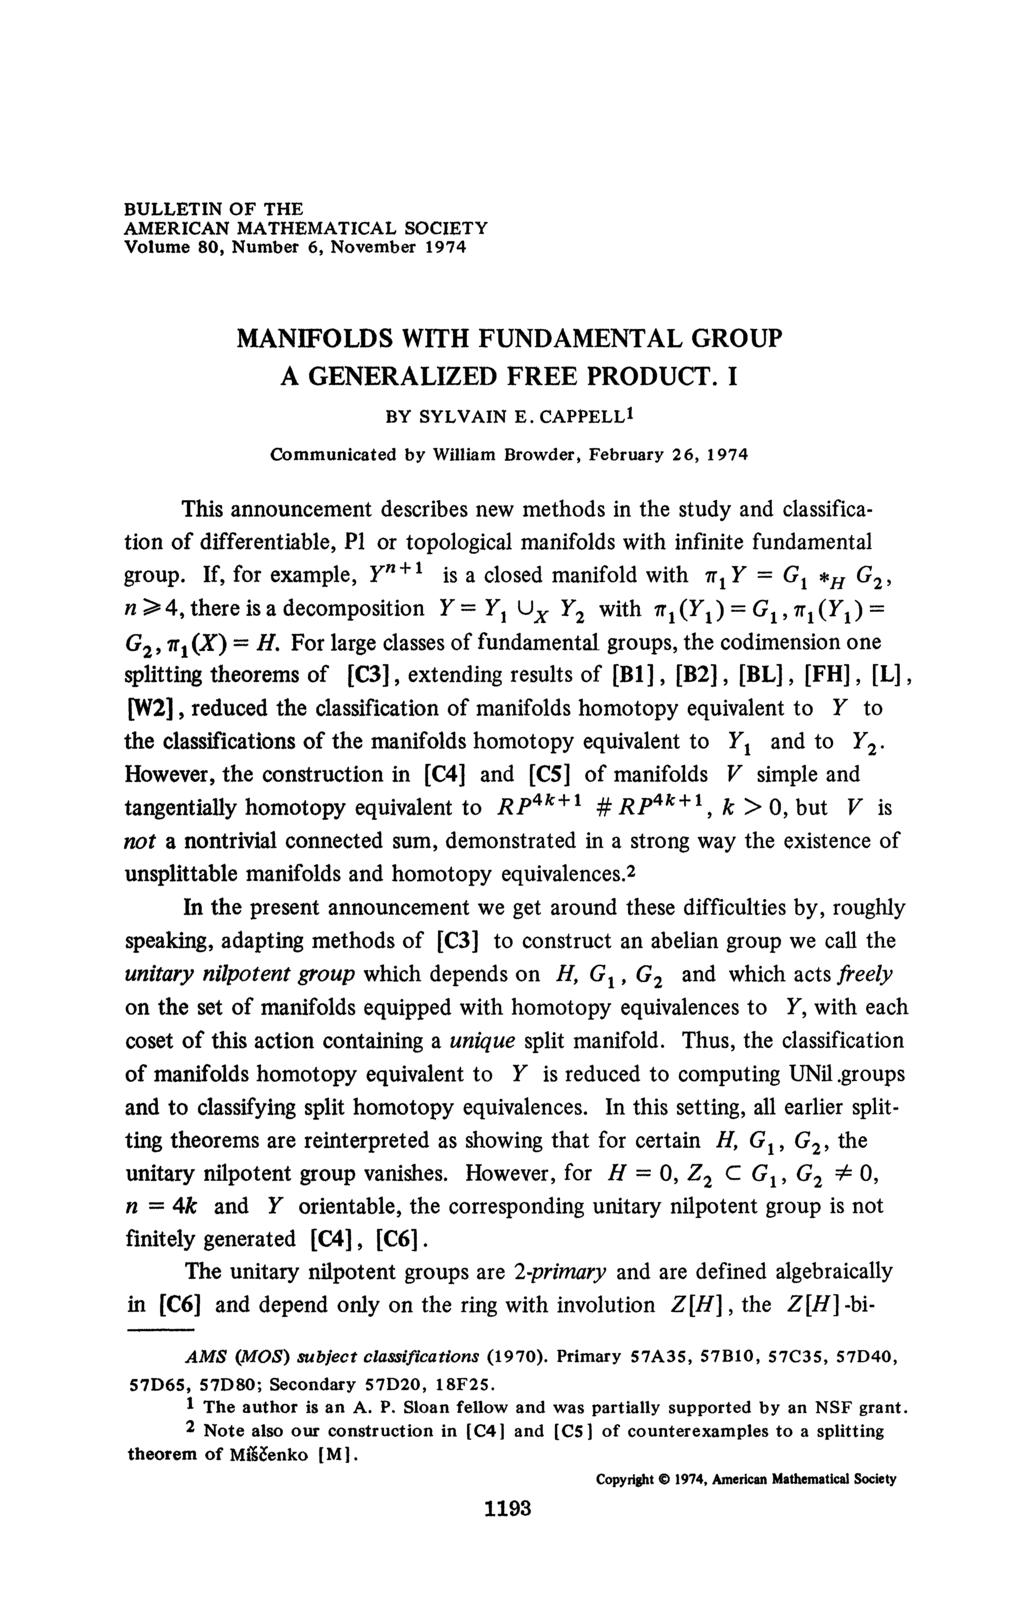 BULLETIN OF THE AMERICAN MATHEMATICAL SOCIETY Volume 80, Number 6, November 1974 MANIFOLDS WITH FUNDAMENTAL GROUP A GENERALIZED FREE PRODUCT. I BY SYLVAIN E.